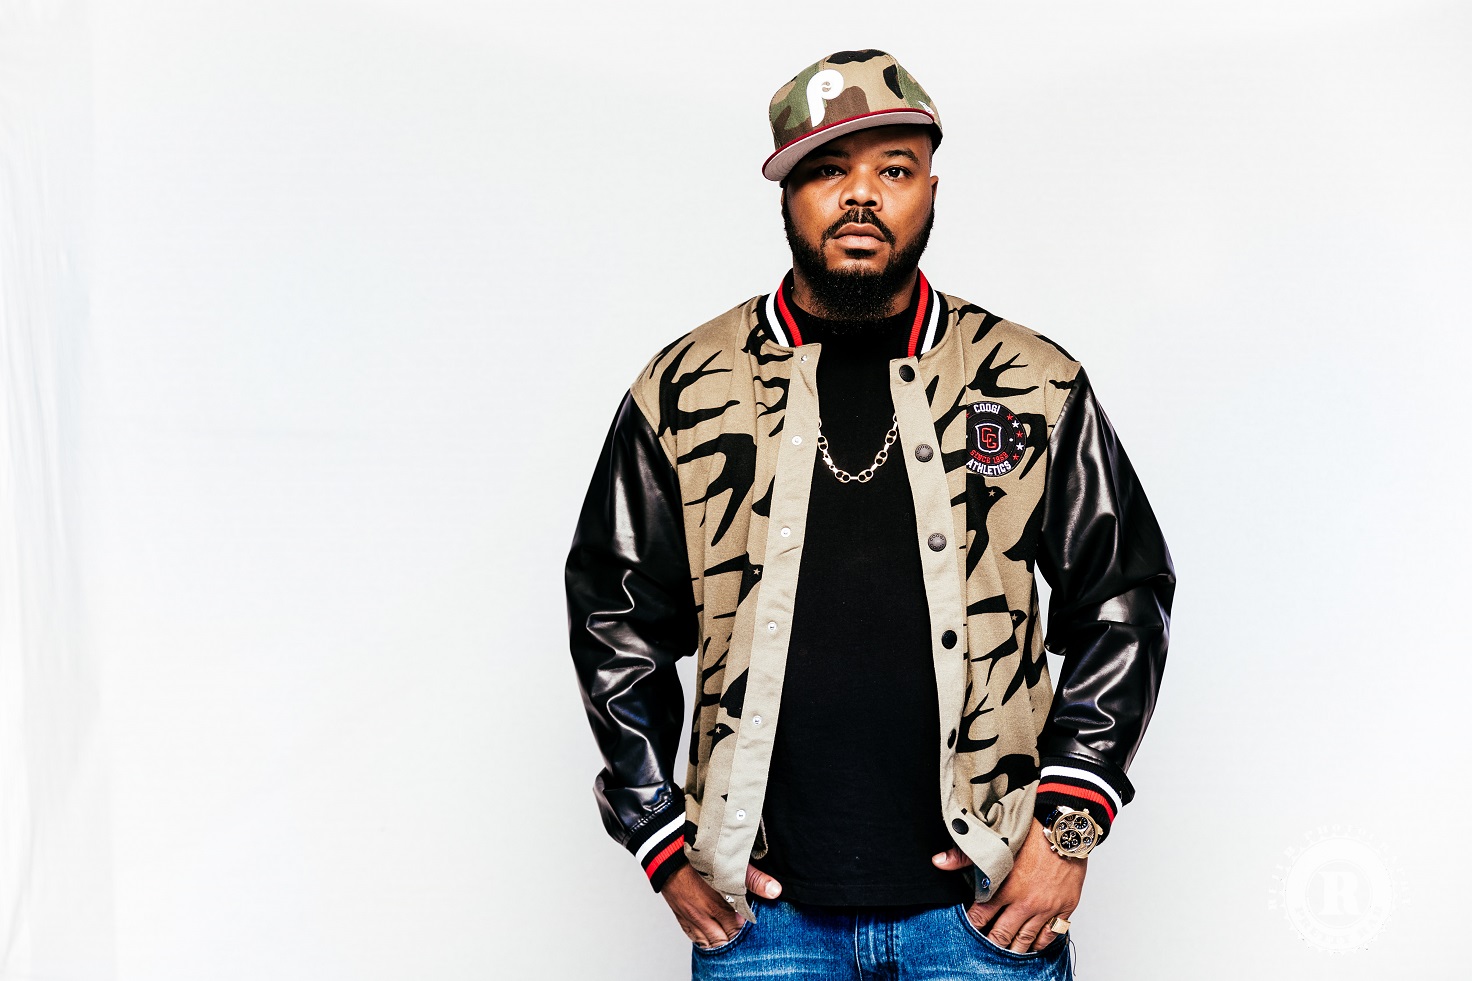 The Grynd Report sits down w/ Warchyld for an exclusive interview! @WARCHYLD_ENT